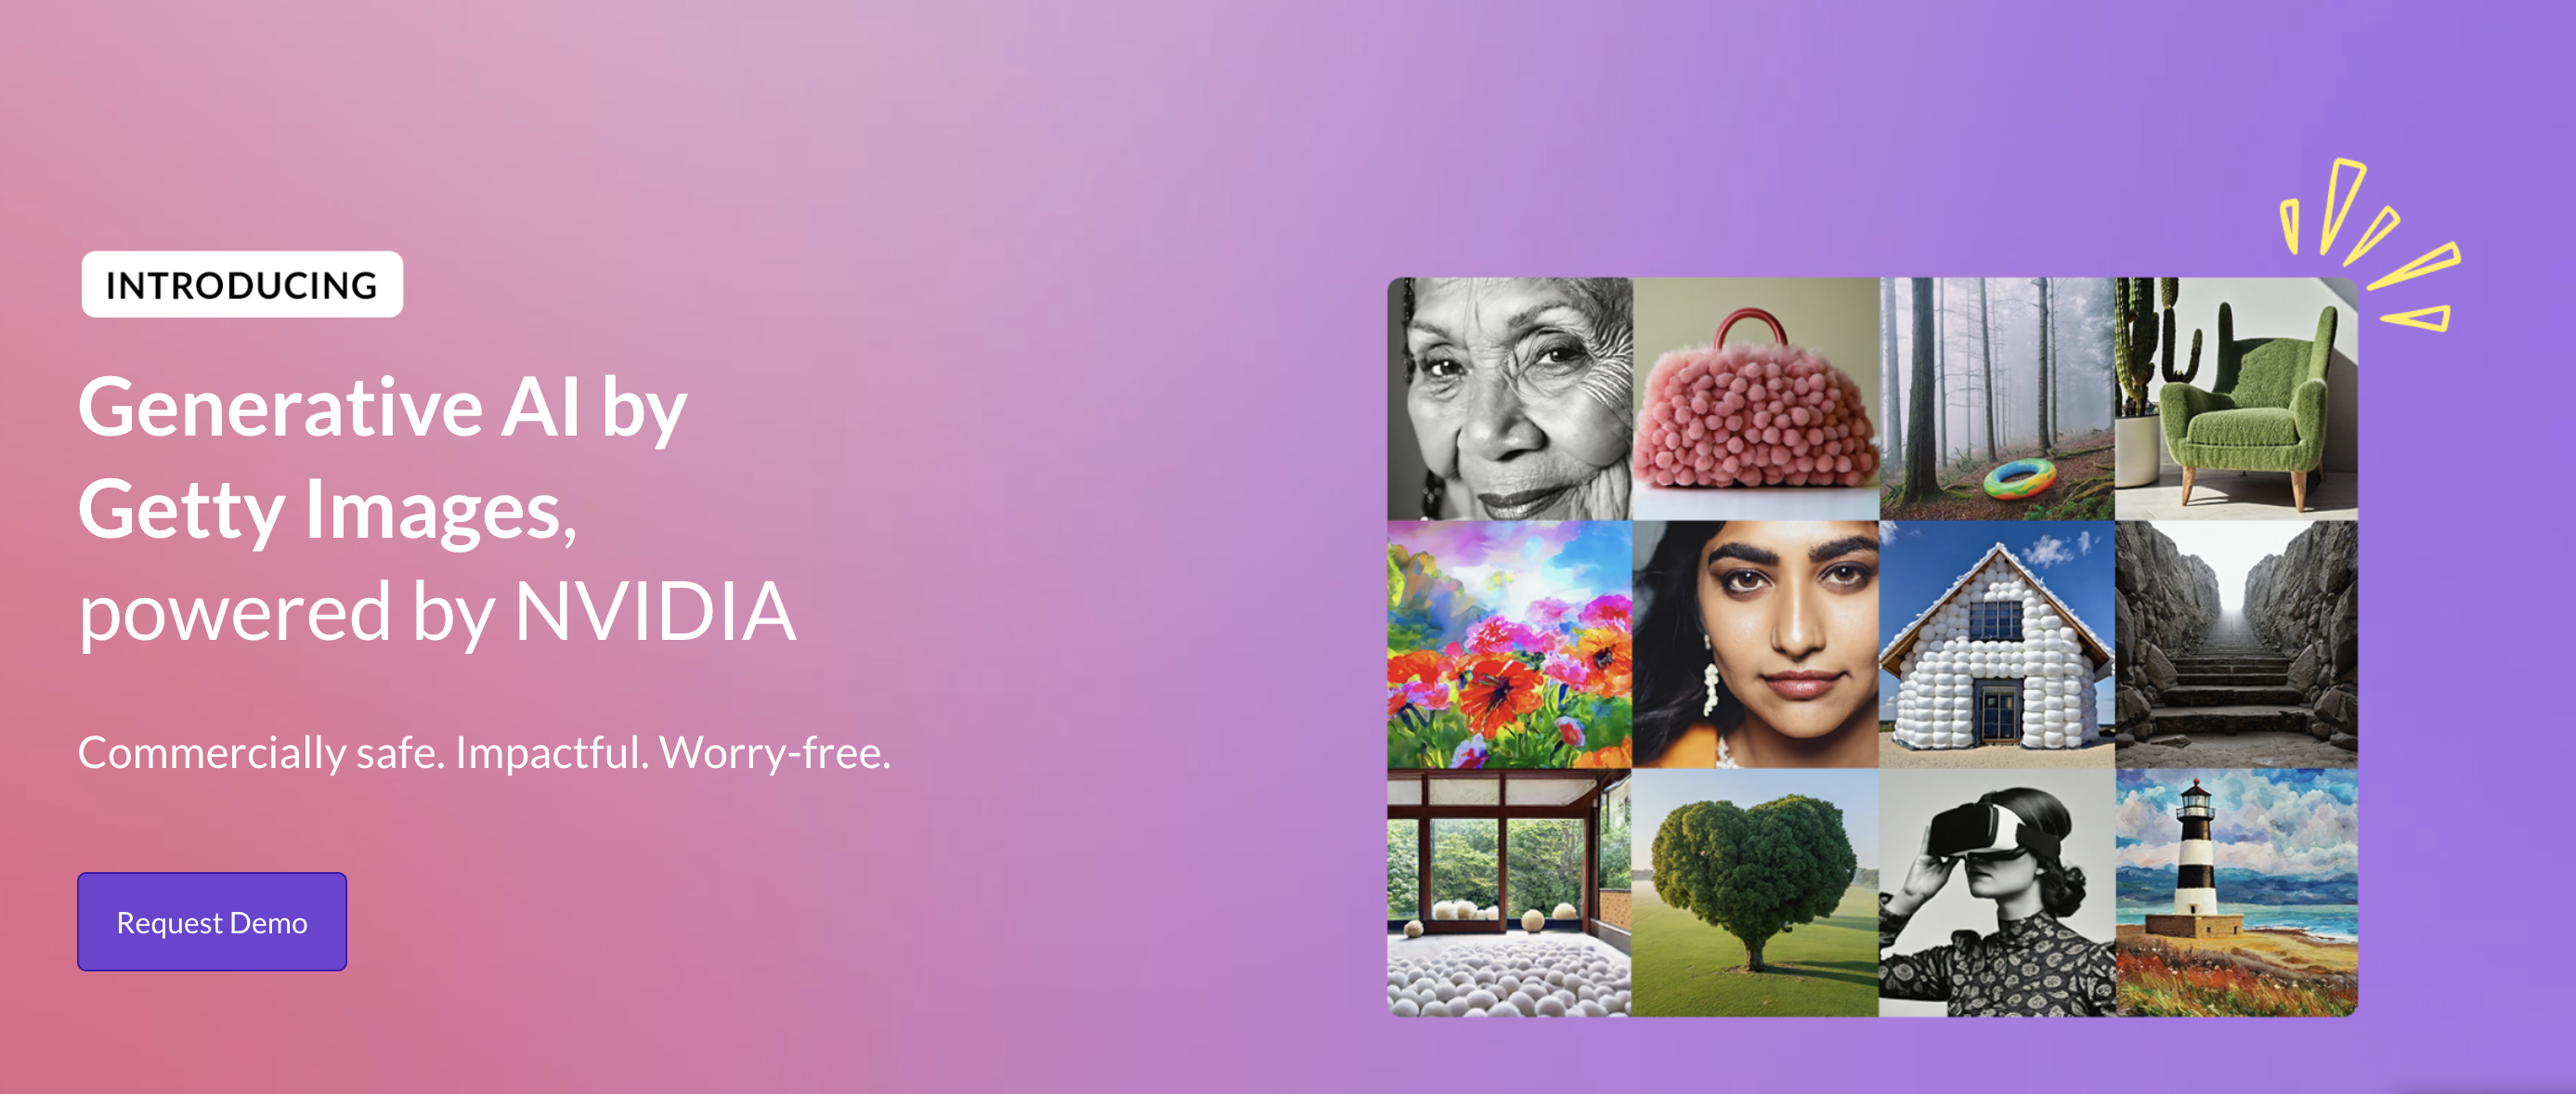 Getty AI images homepage